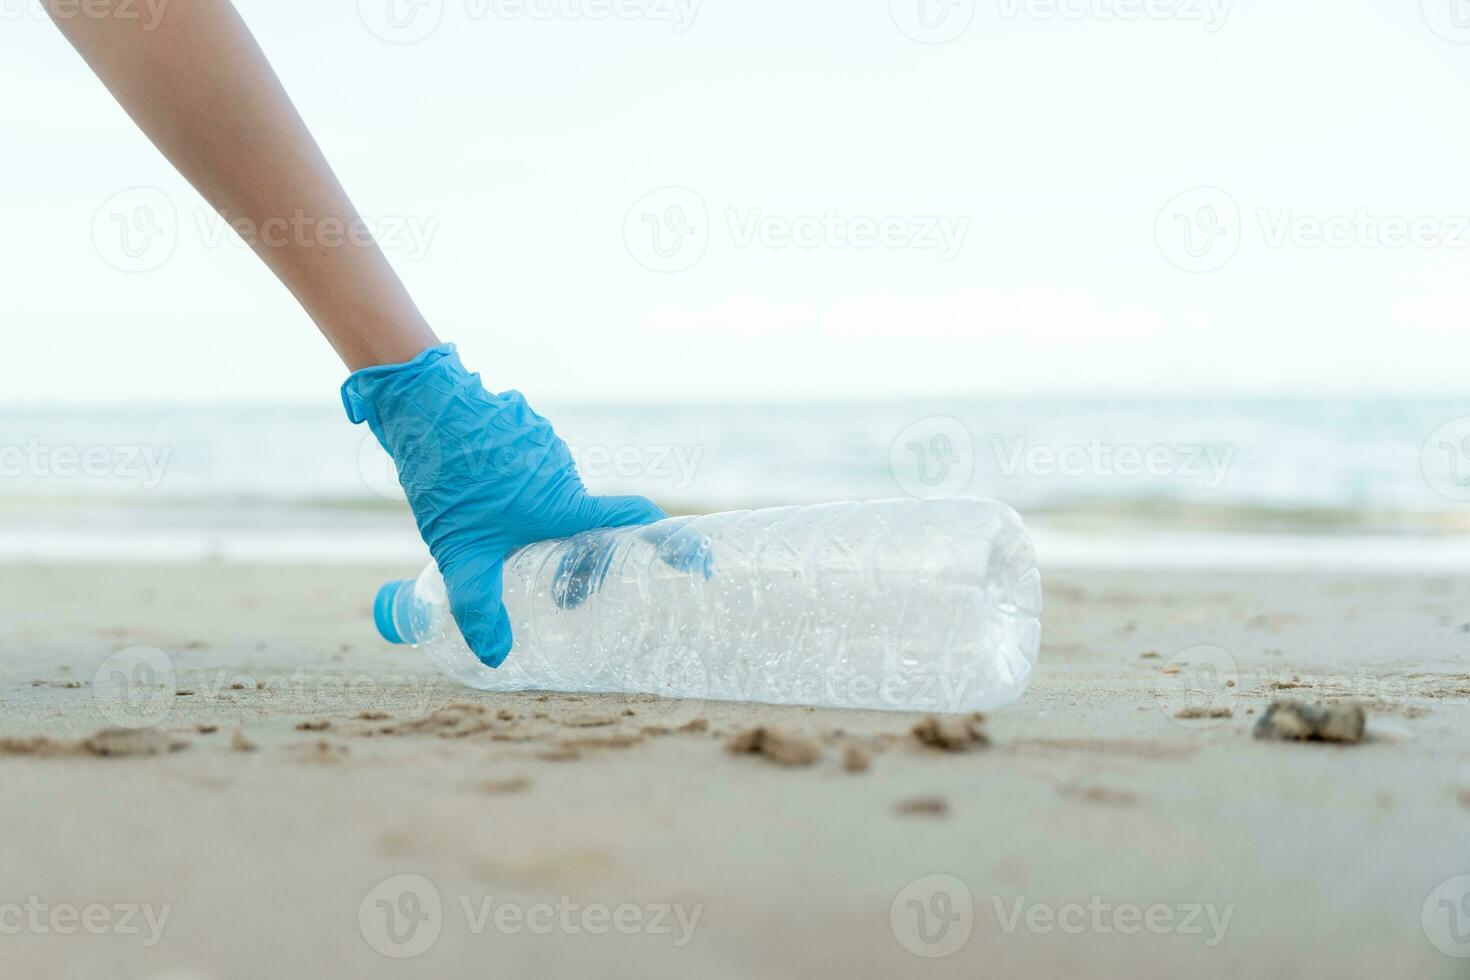 Save ocean. Volunteer pick up trash garbage at the beach and plastic bottles are difficult decompose prevent harm aquatic life. Earth, Environment, Greening planet, reduce global warming, Save world photo